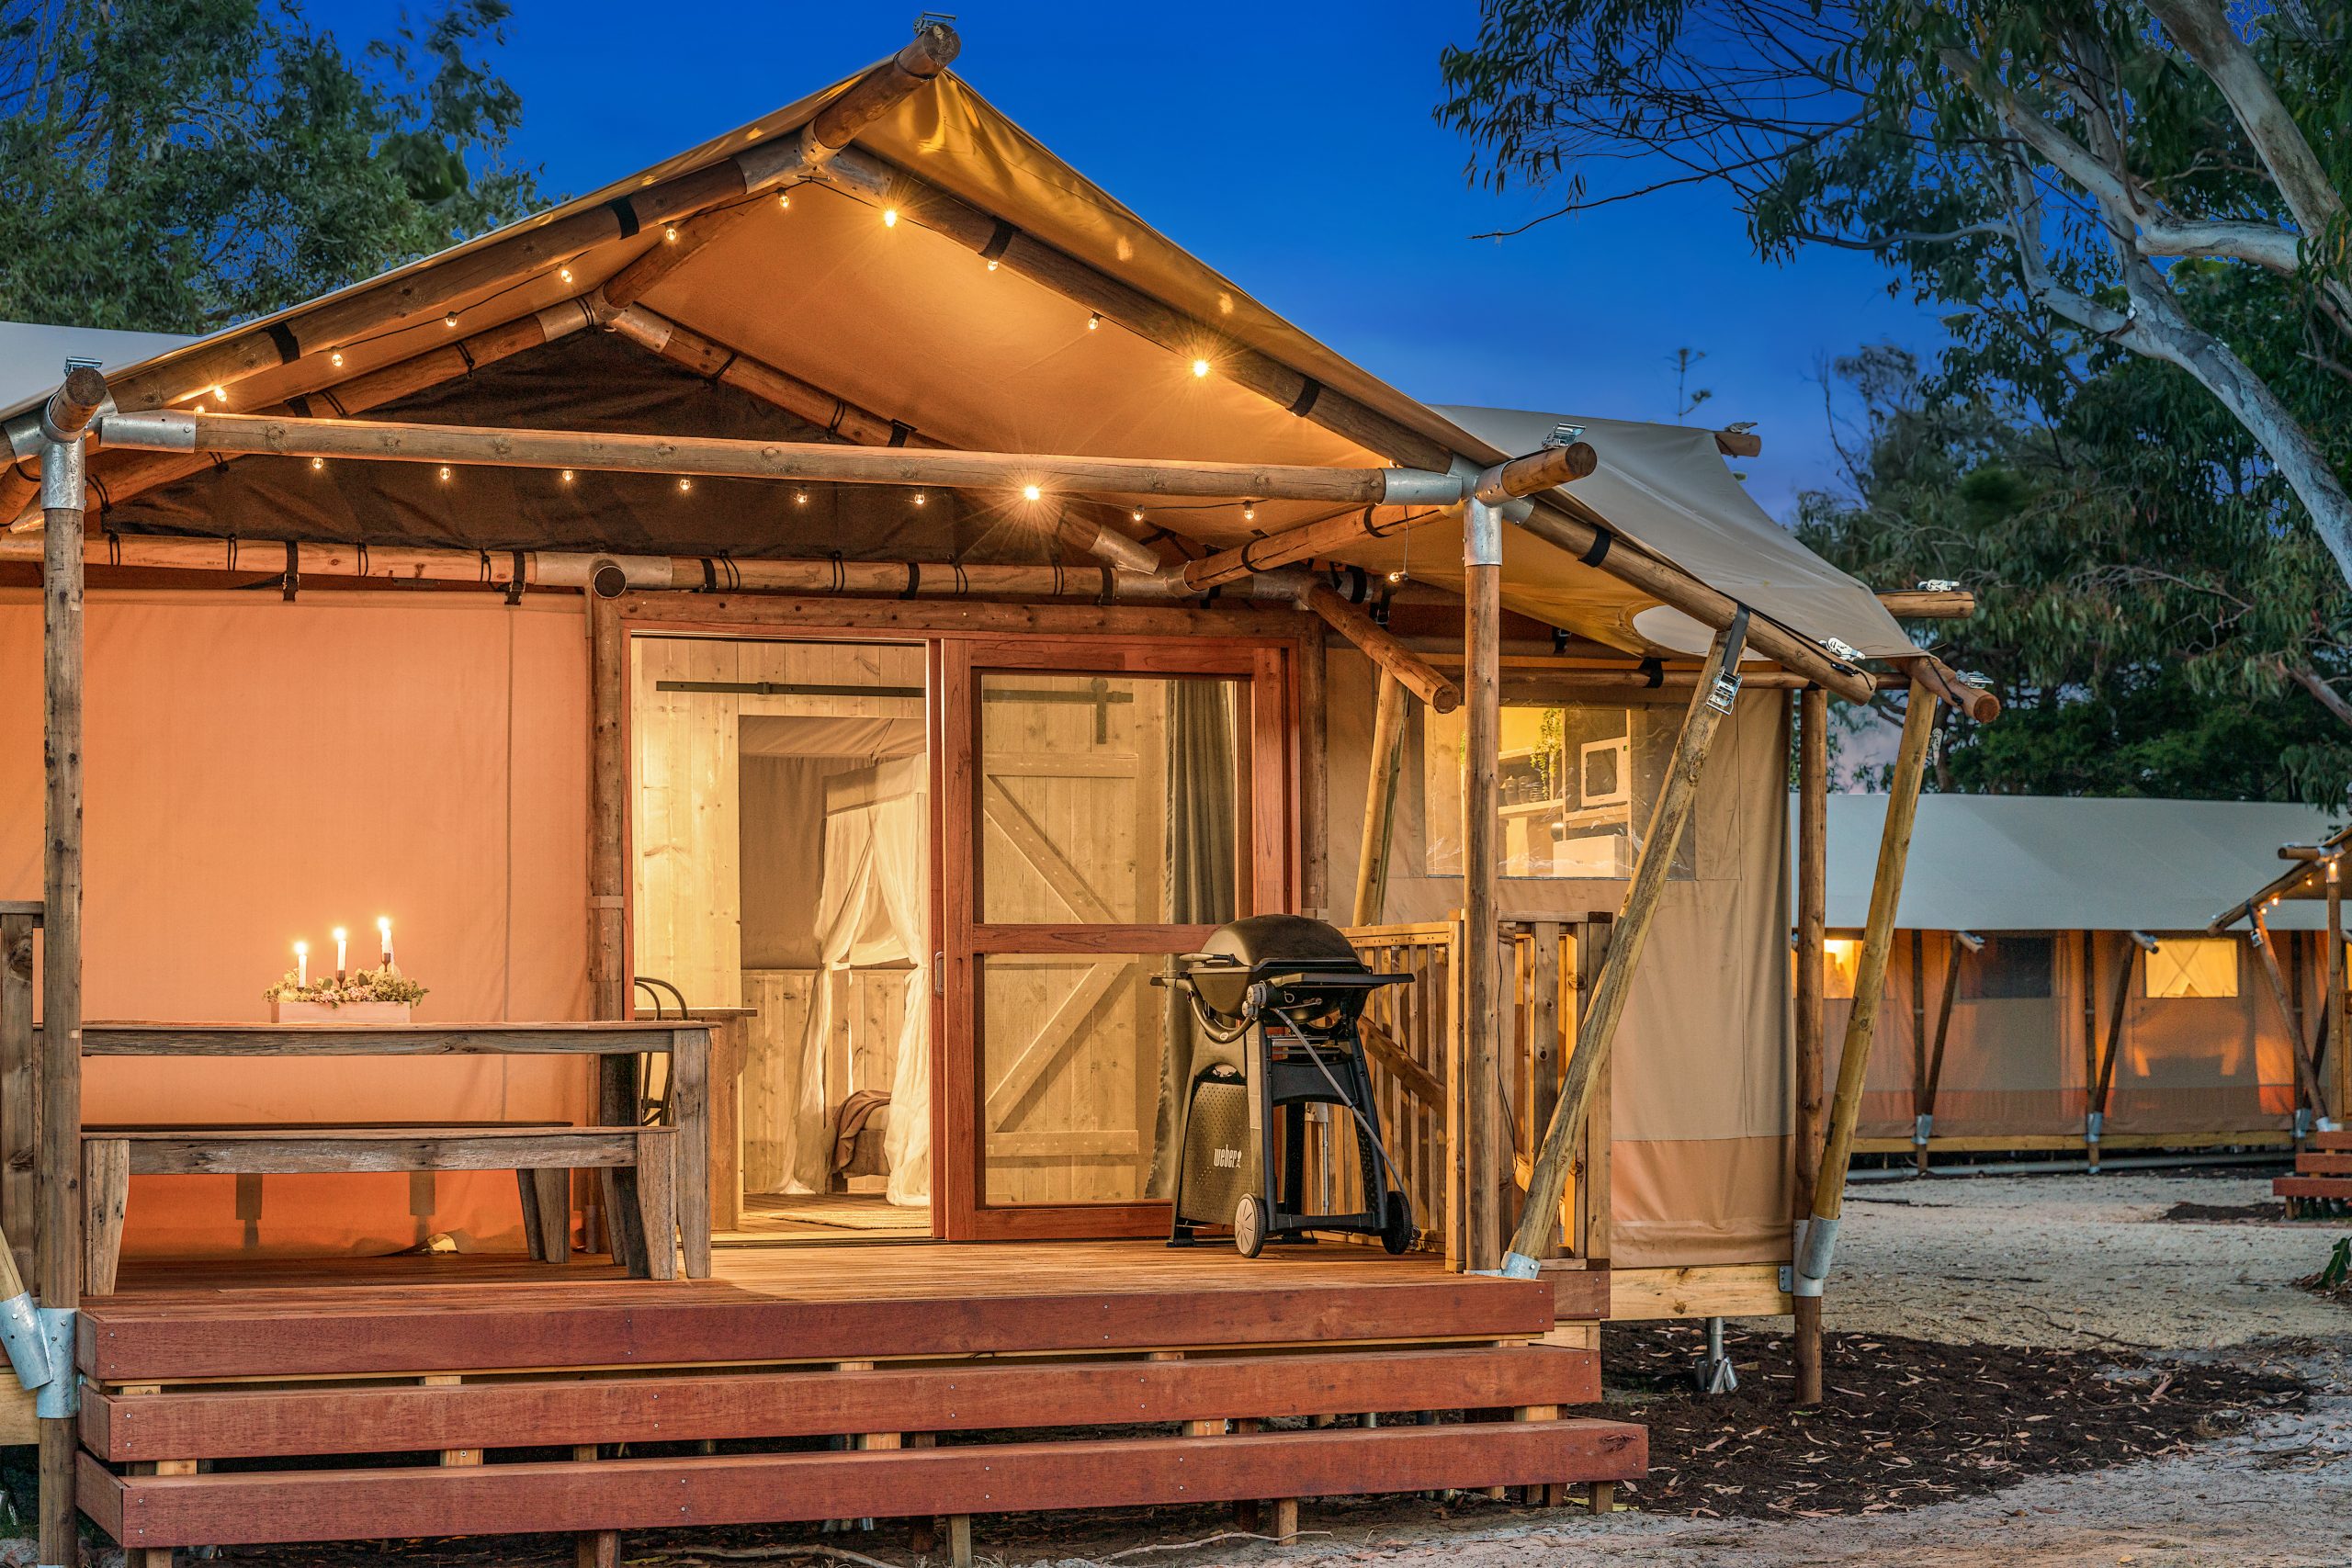 Evening glamping & remote vacation experiences